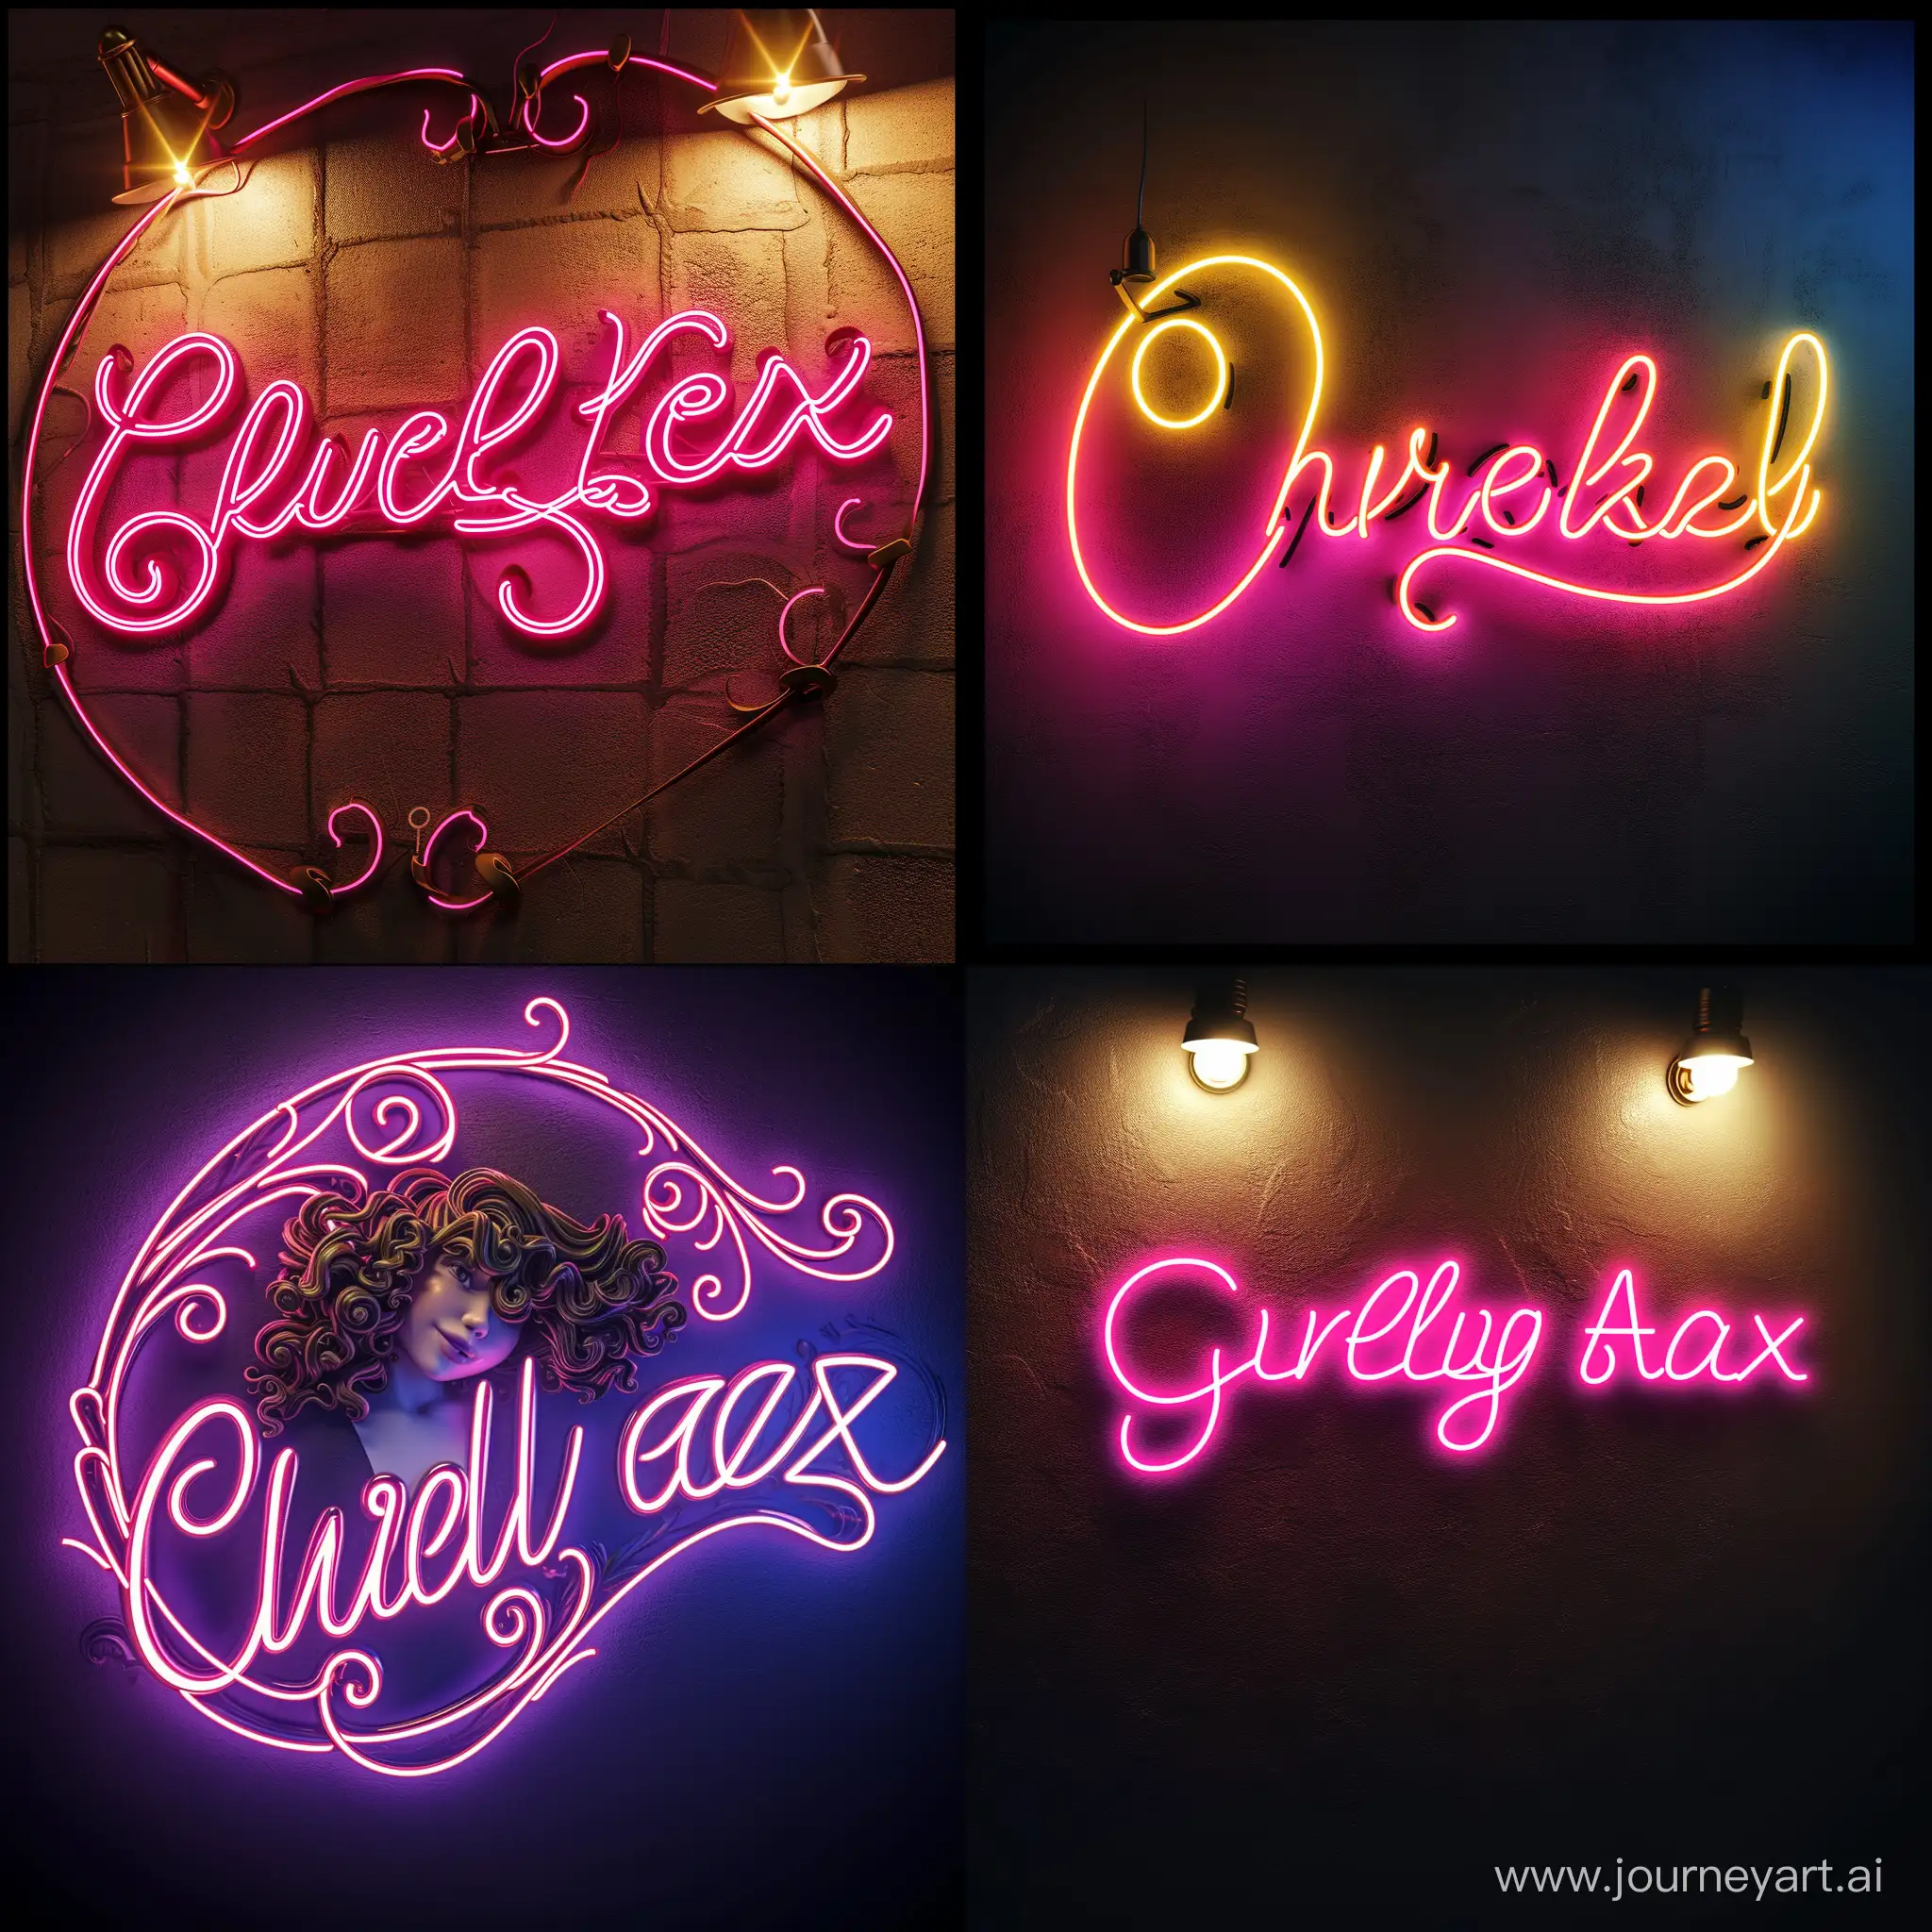 Vibrant-CurlyAlex-NeonStyle-Banner-with-6th-Version-Design